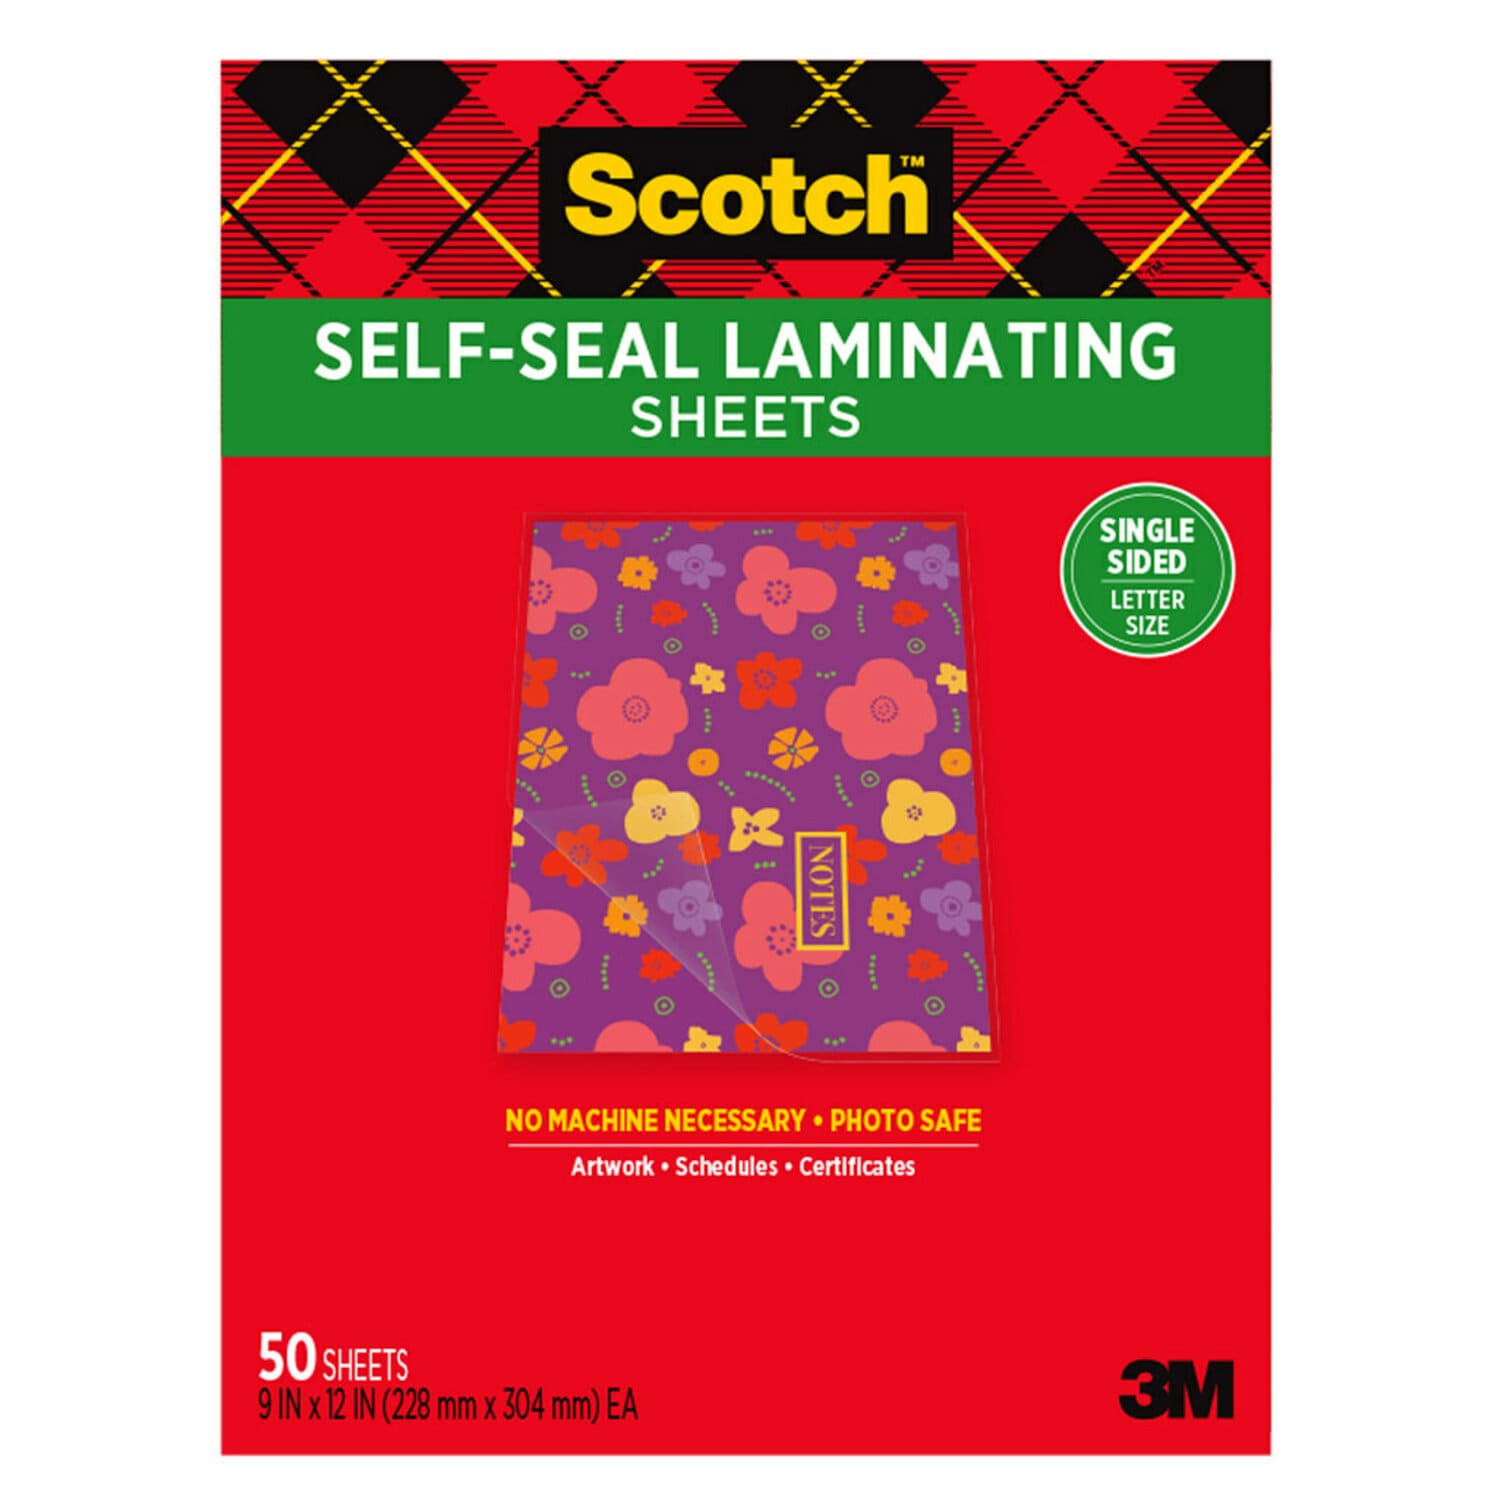 7100292354 - Scotch Laminating Sheets LS854SS-50, 9 in x 12 in (228 mm x 304 mm) Letter Size Single Sided